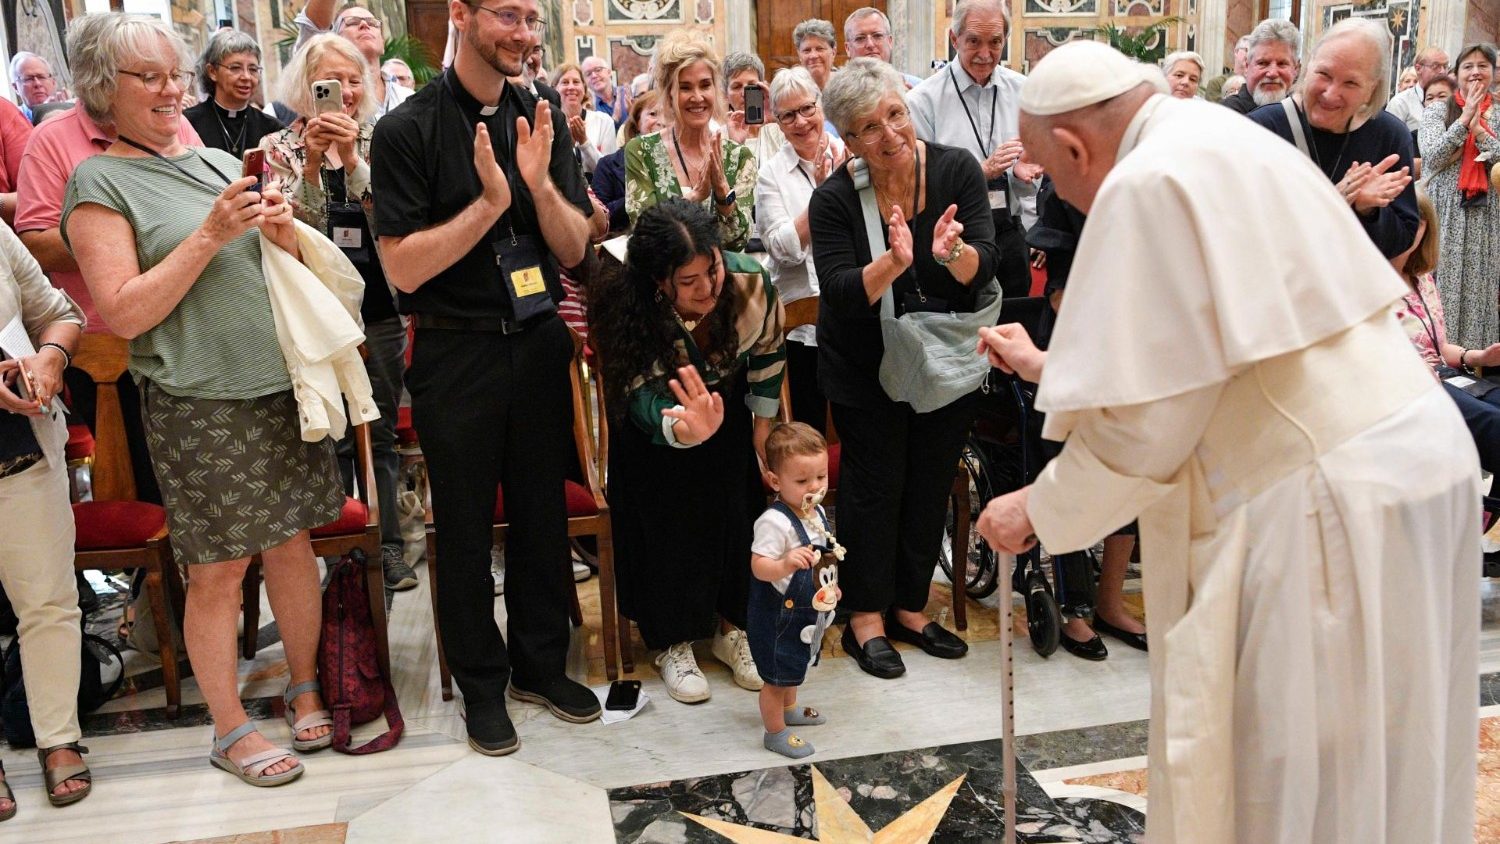 Francis: There is a need for Christians who do not point fingers but who radiate the Gospel